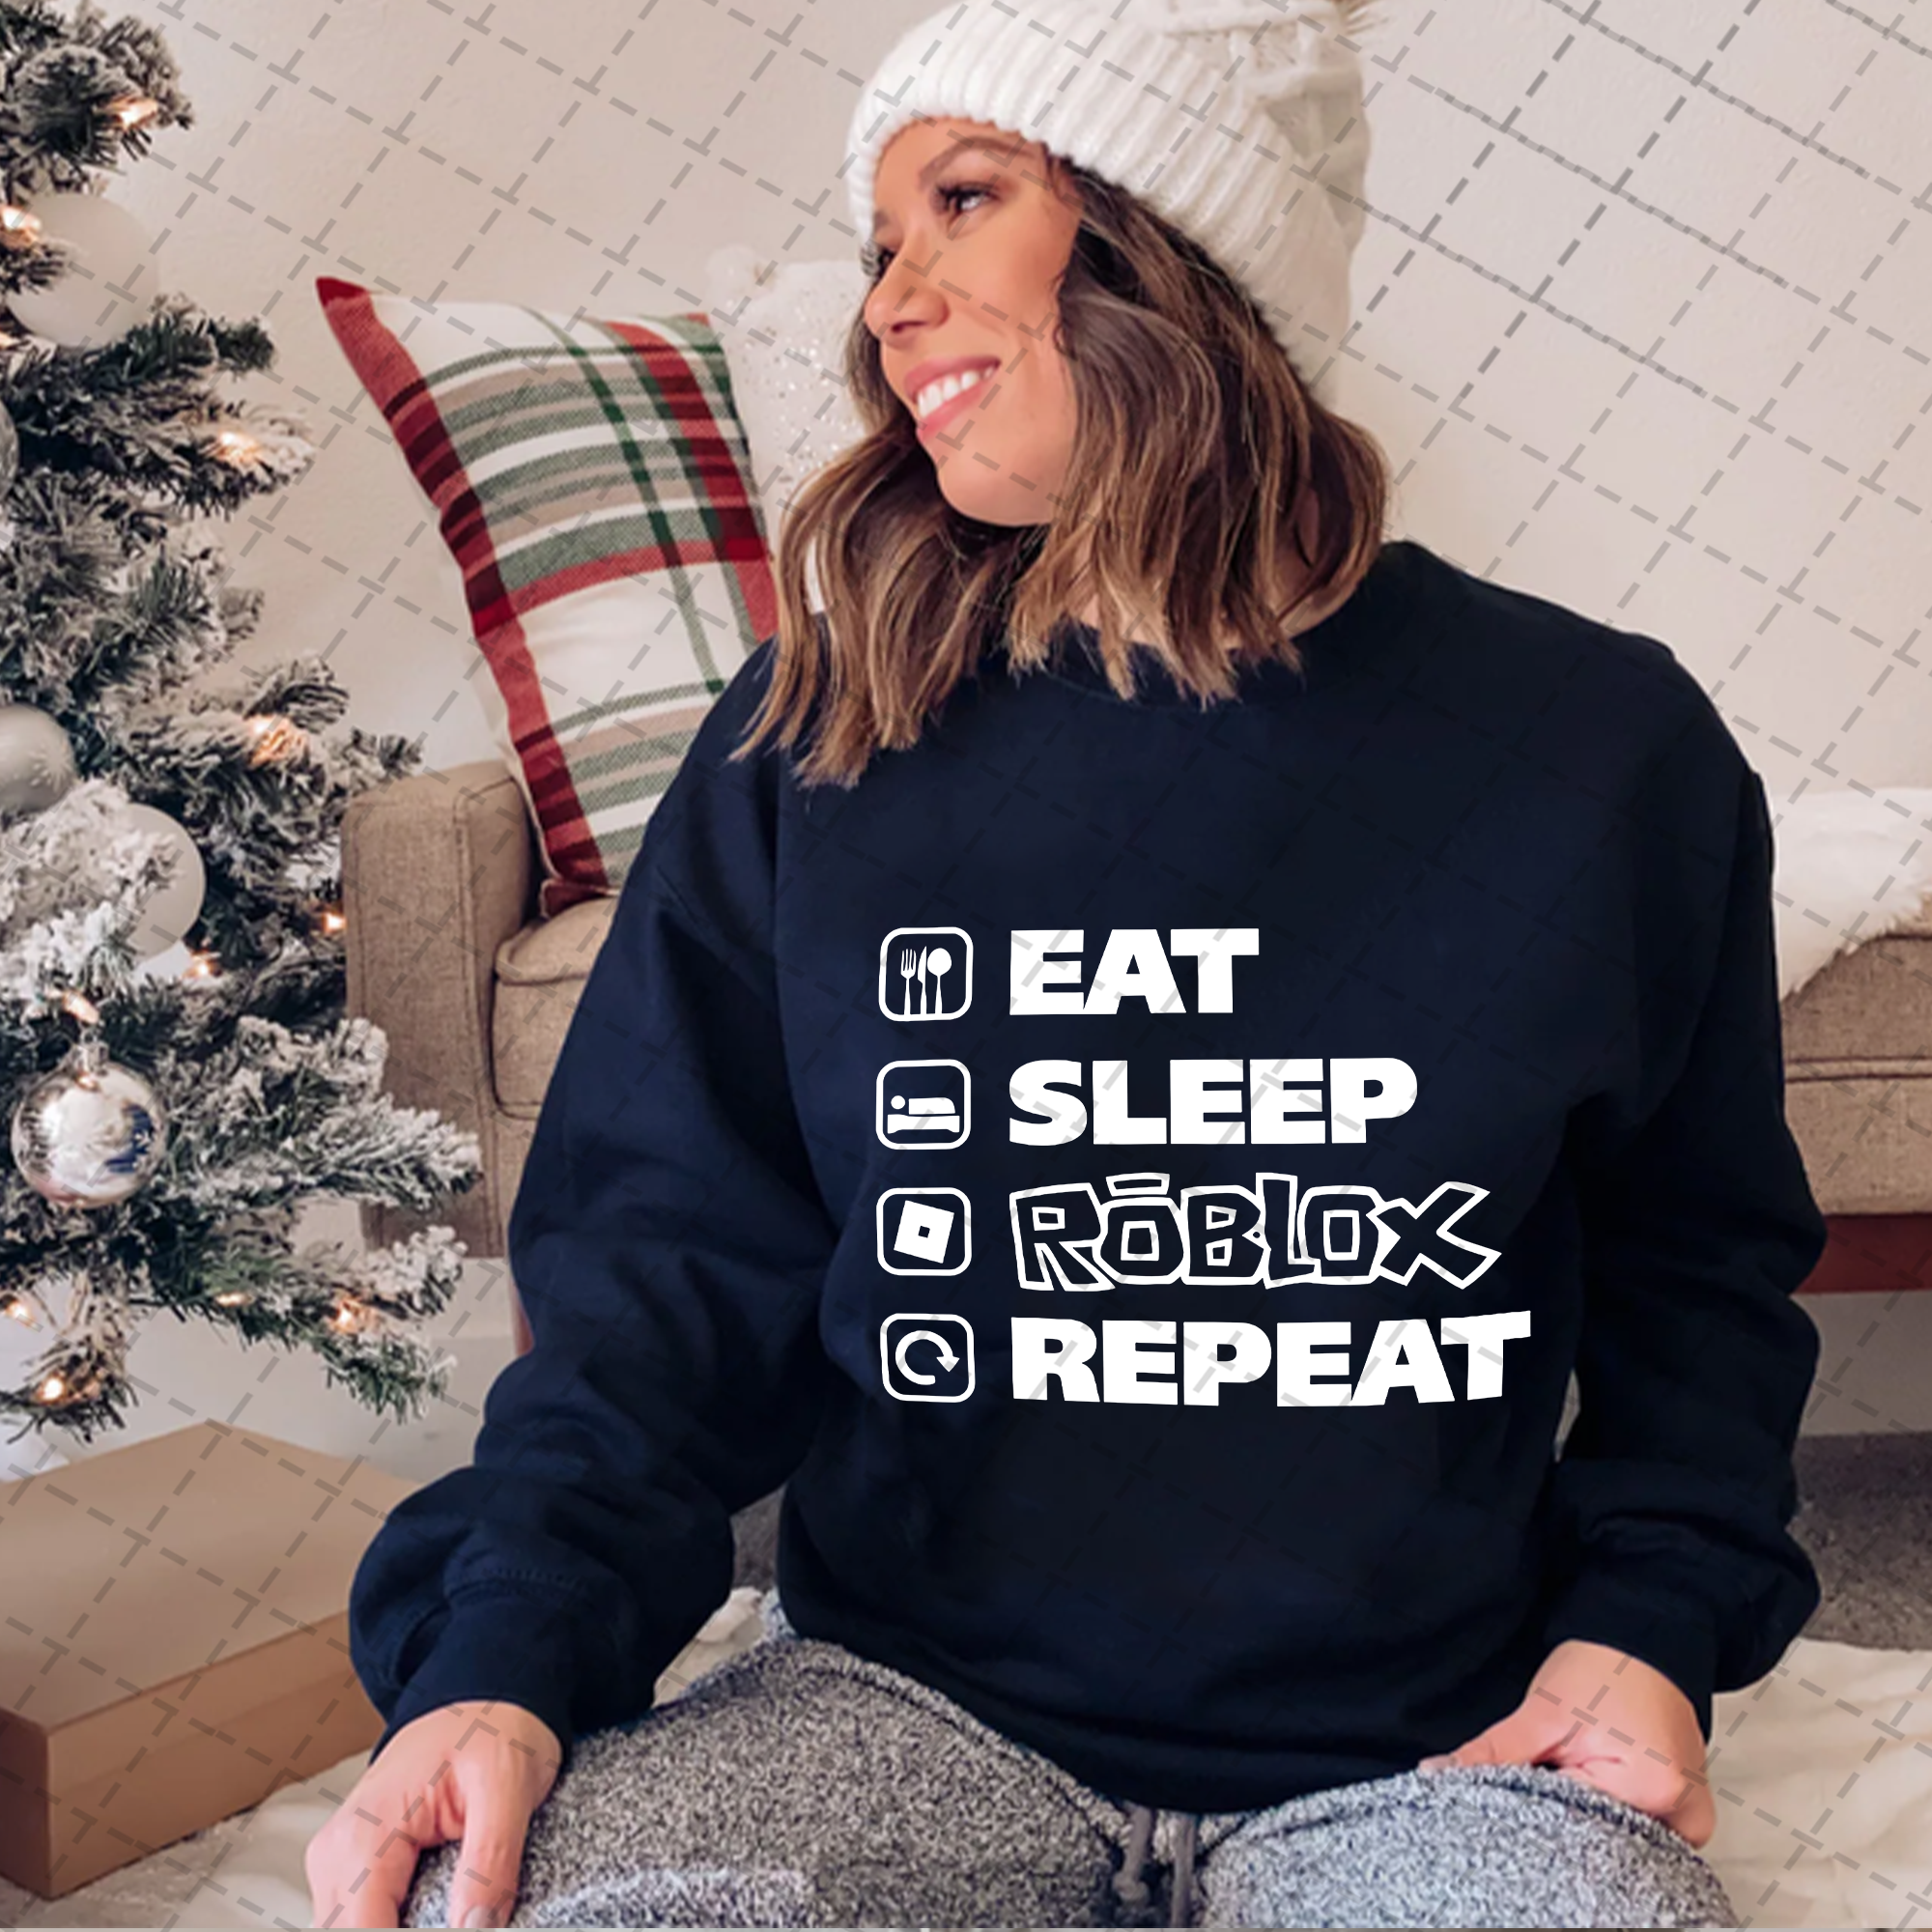 Eat Sleep Roblox Repeat T-Shirt, group Shirt, Birthday Party Tee, Quarantine and Roblox Outfit, Kids T Shirt, Birthday Present for Kids